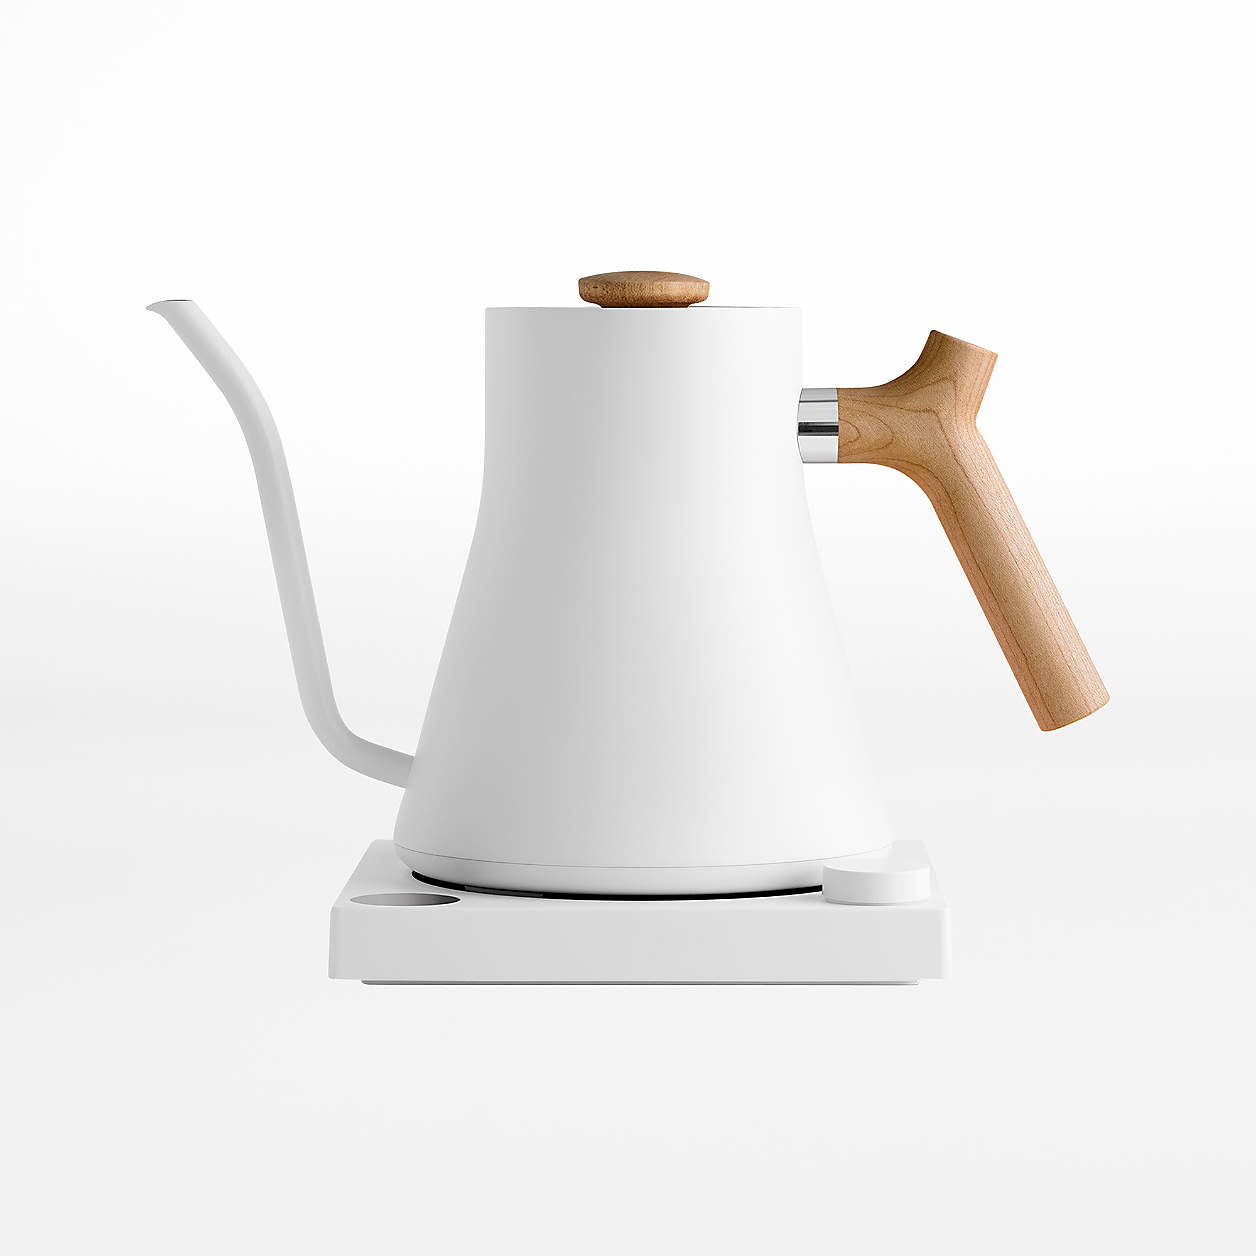 Wedding Registry - Fellow Stagg EKG Matte White Electric Tea Kettle with Maple Handle